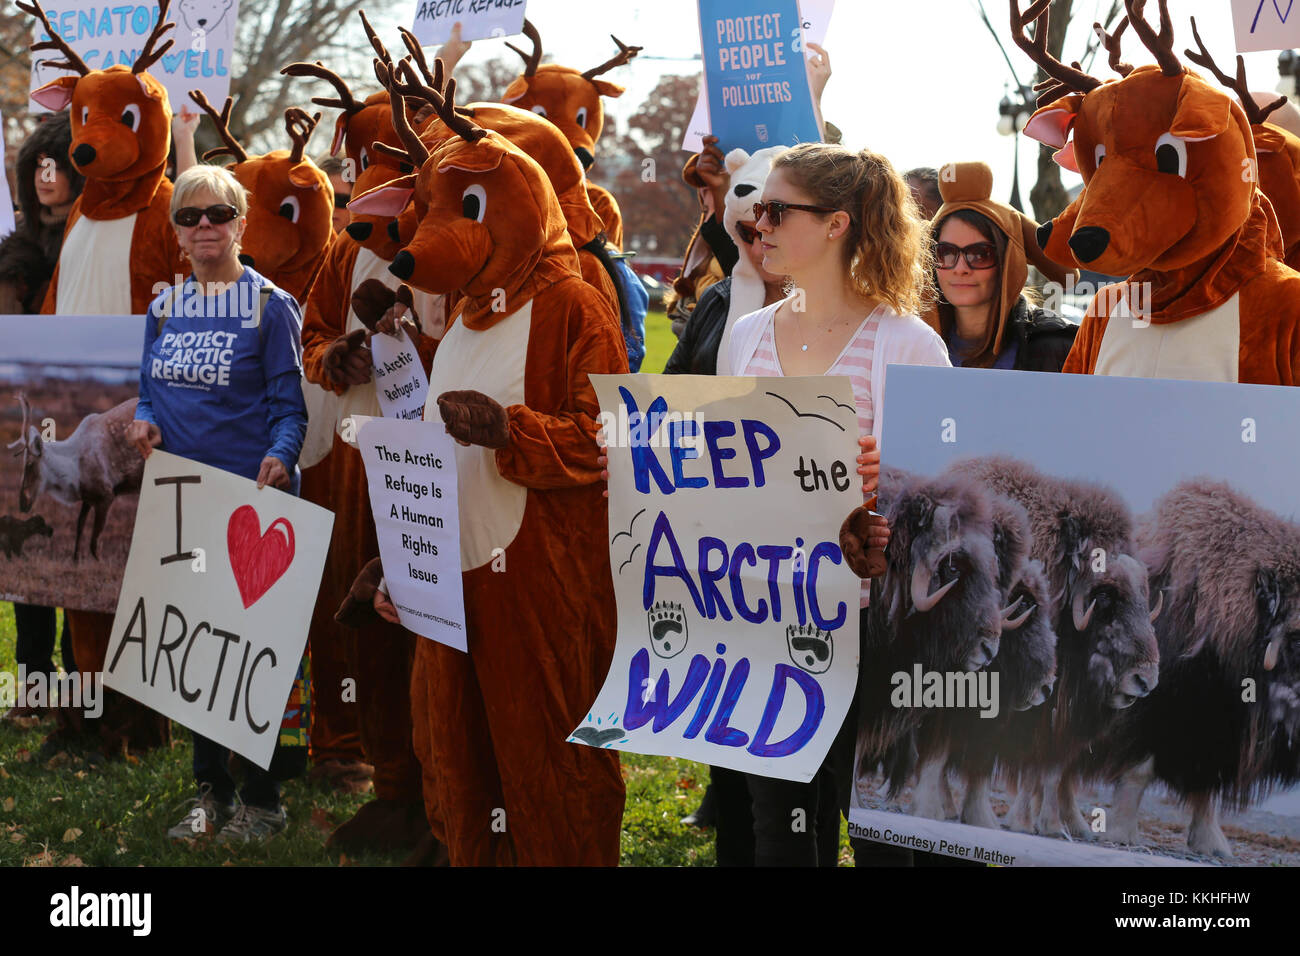 Washington, United States. 30th Nov, 2017. Alaska Wilderness League activists wear caribou costumes during a protest against drilling in the Arctic National Wildlife Refuge outside the U.S. Capitol November 30, 2017 in Washington, DC. The Republican led Senate is attempting to allow oil drilling in the Arctic by hiding it in the tax cut bill. (photo by US Senate Photo via Credit: Planetpix/Alamy Live News Stock Photo